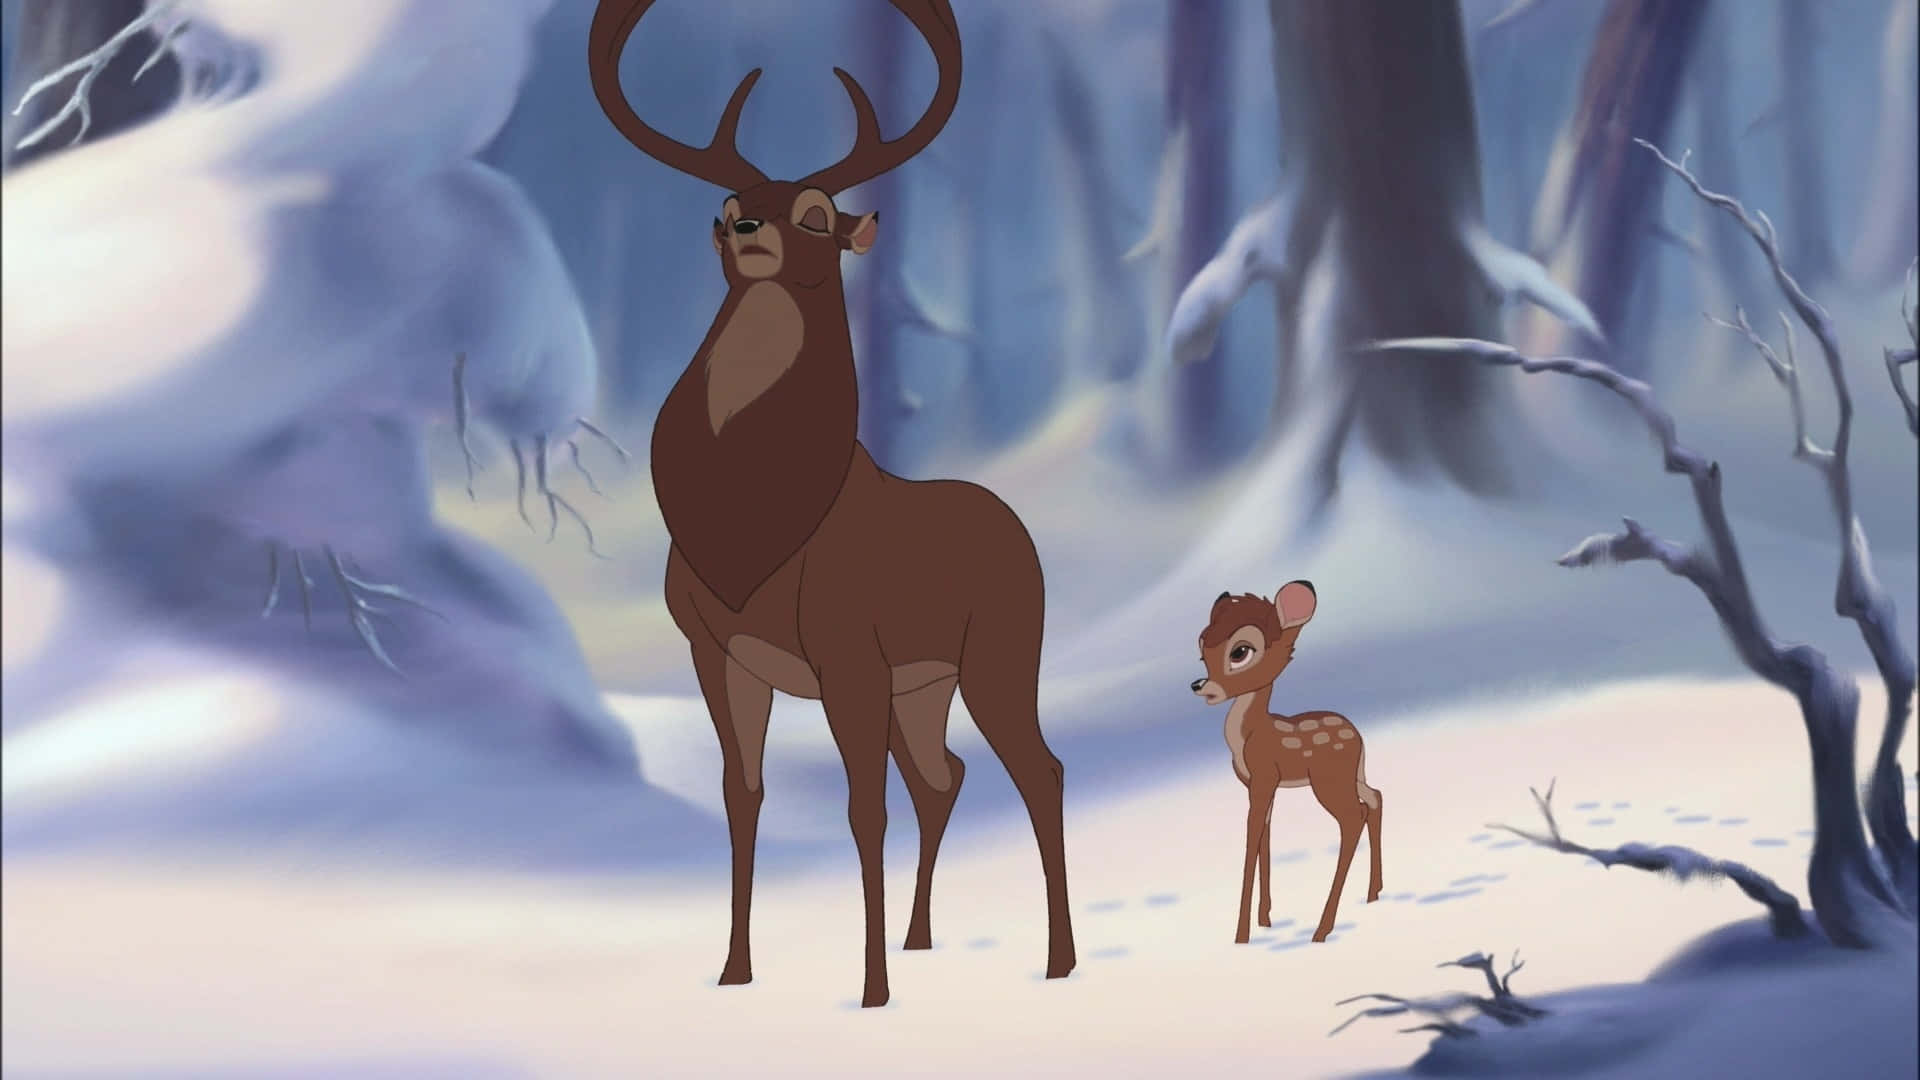 Join Bambi as He Explores the Forest